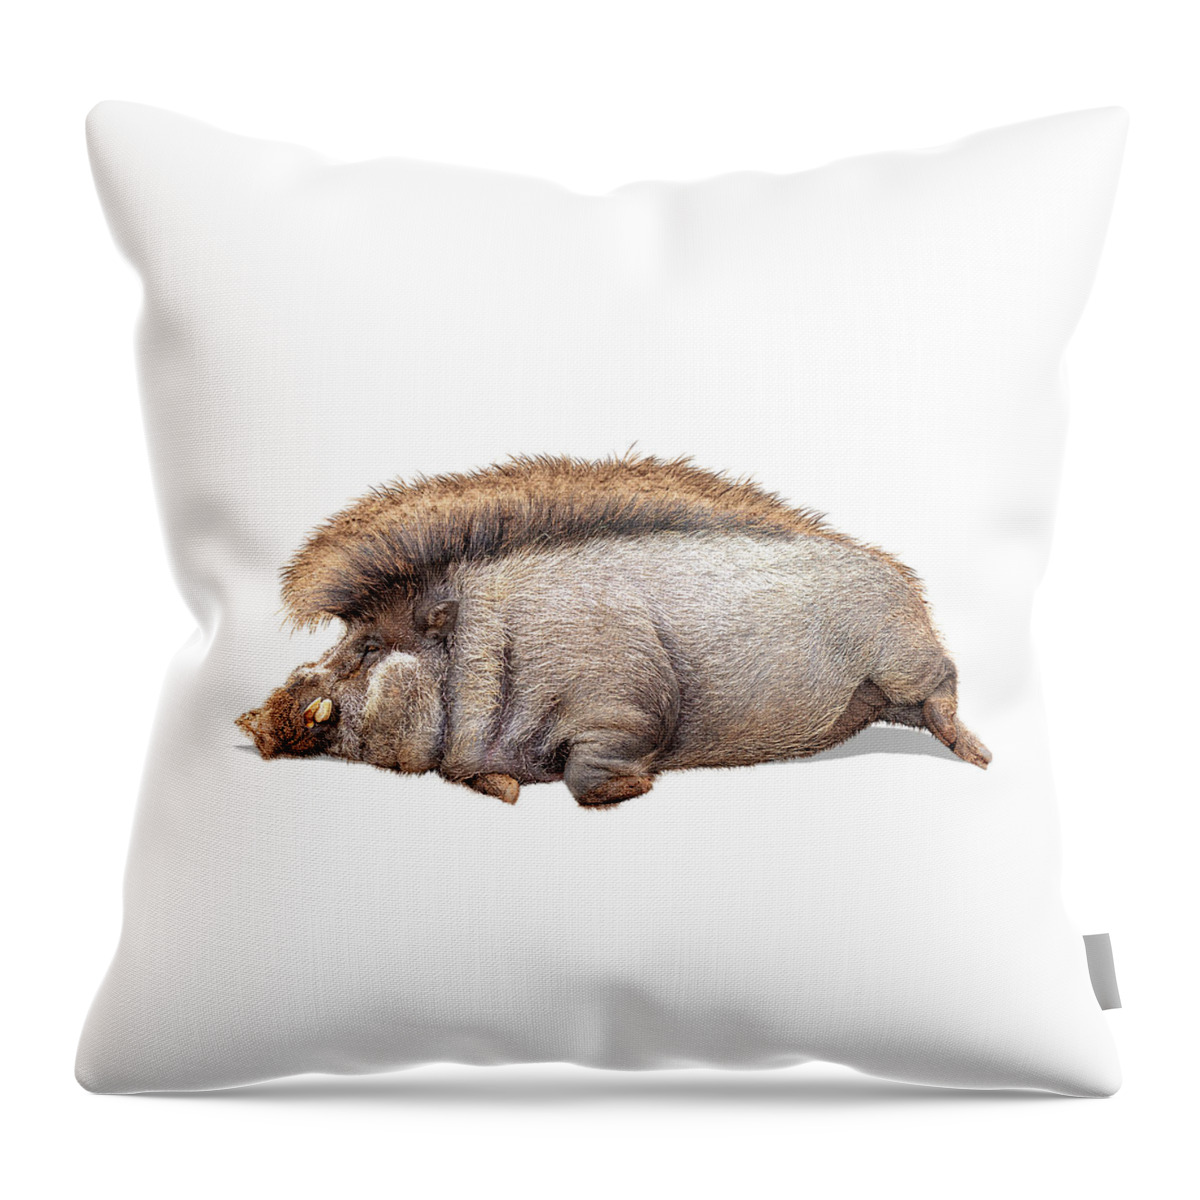 Warty Pig Throw Pillow featuring the photograph Warty Pig Named Bavani by Good Focused